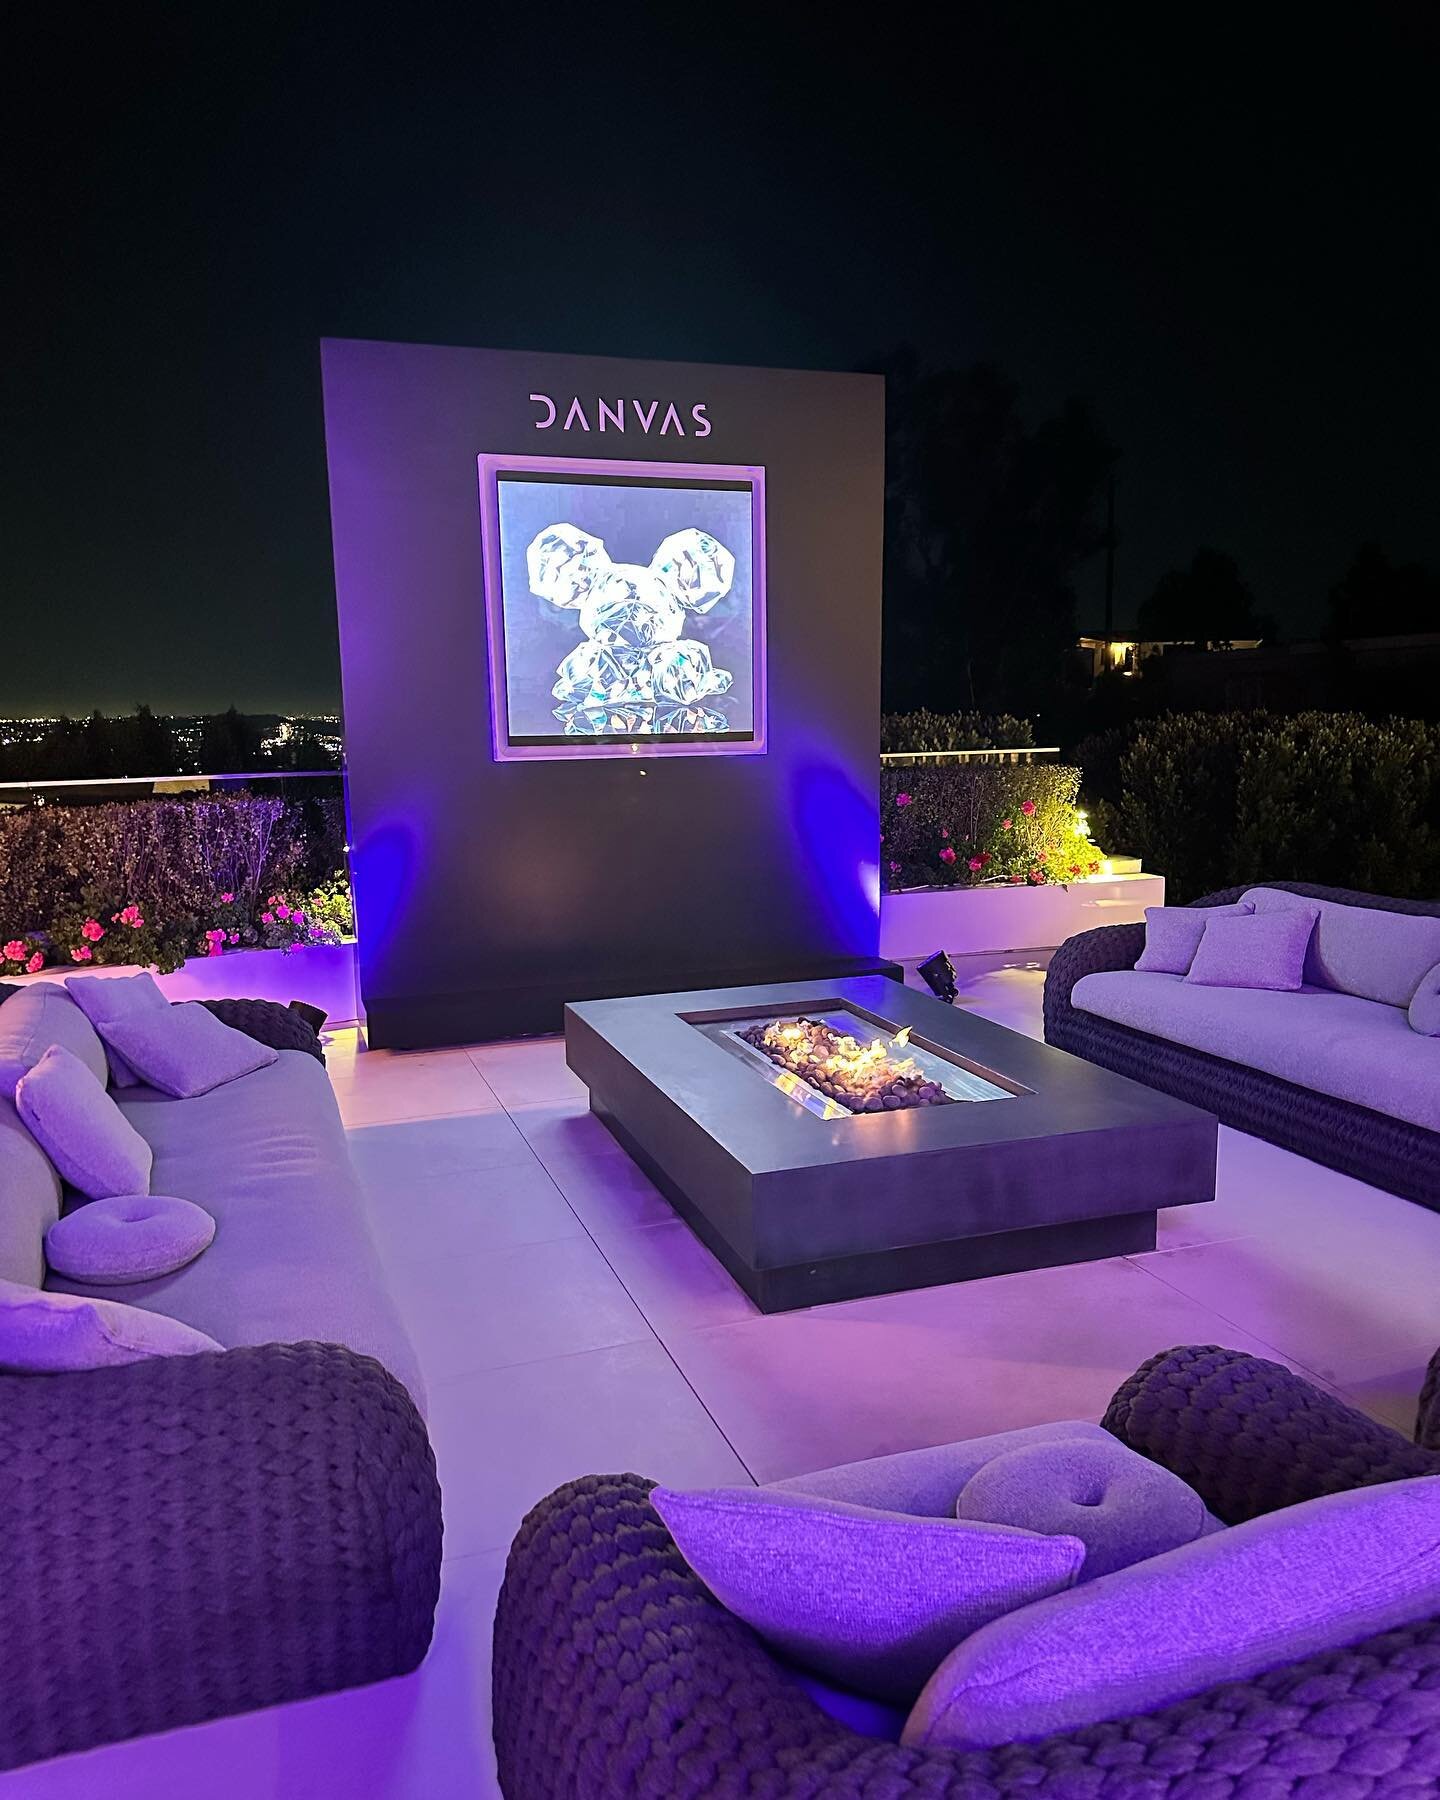 Such a beautiful event for the launch of @danvas.art , thank you @chrisdelicioso88 for trusting us with your amazing event. Check out some pics from the event. #catering #cocktailparty #westhollywood #hollywoodcaterer #cheflife #cocktails #hollywoodh